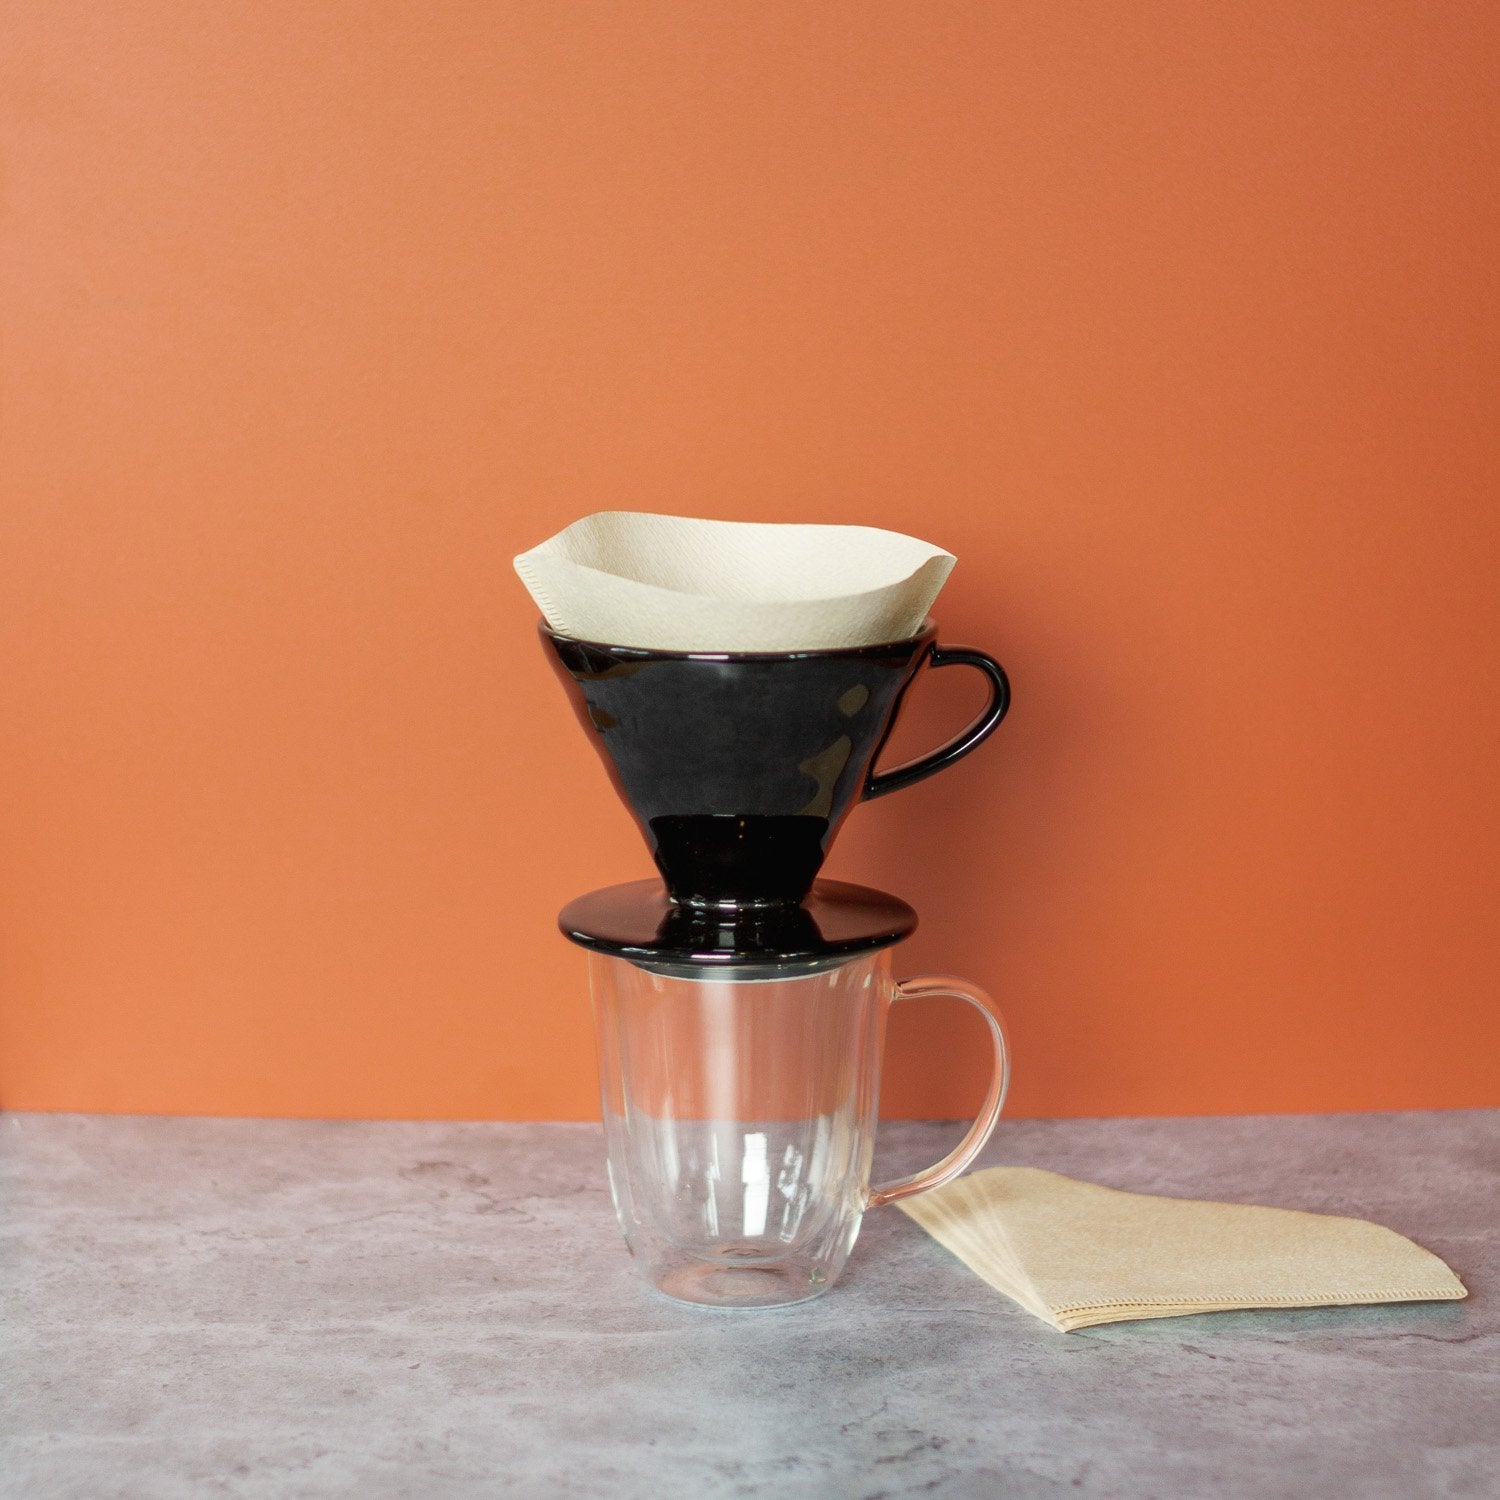 Permanent Coffee Filter vs Paper - How do They Impact the Environment? - Zavida Coffee